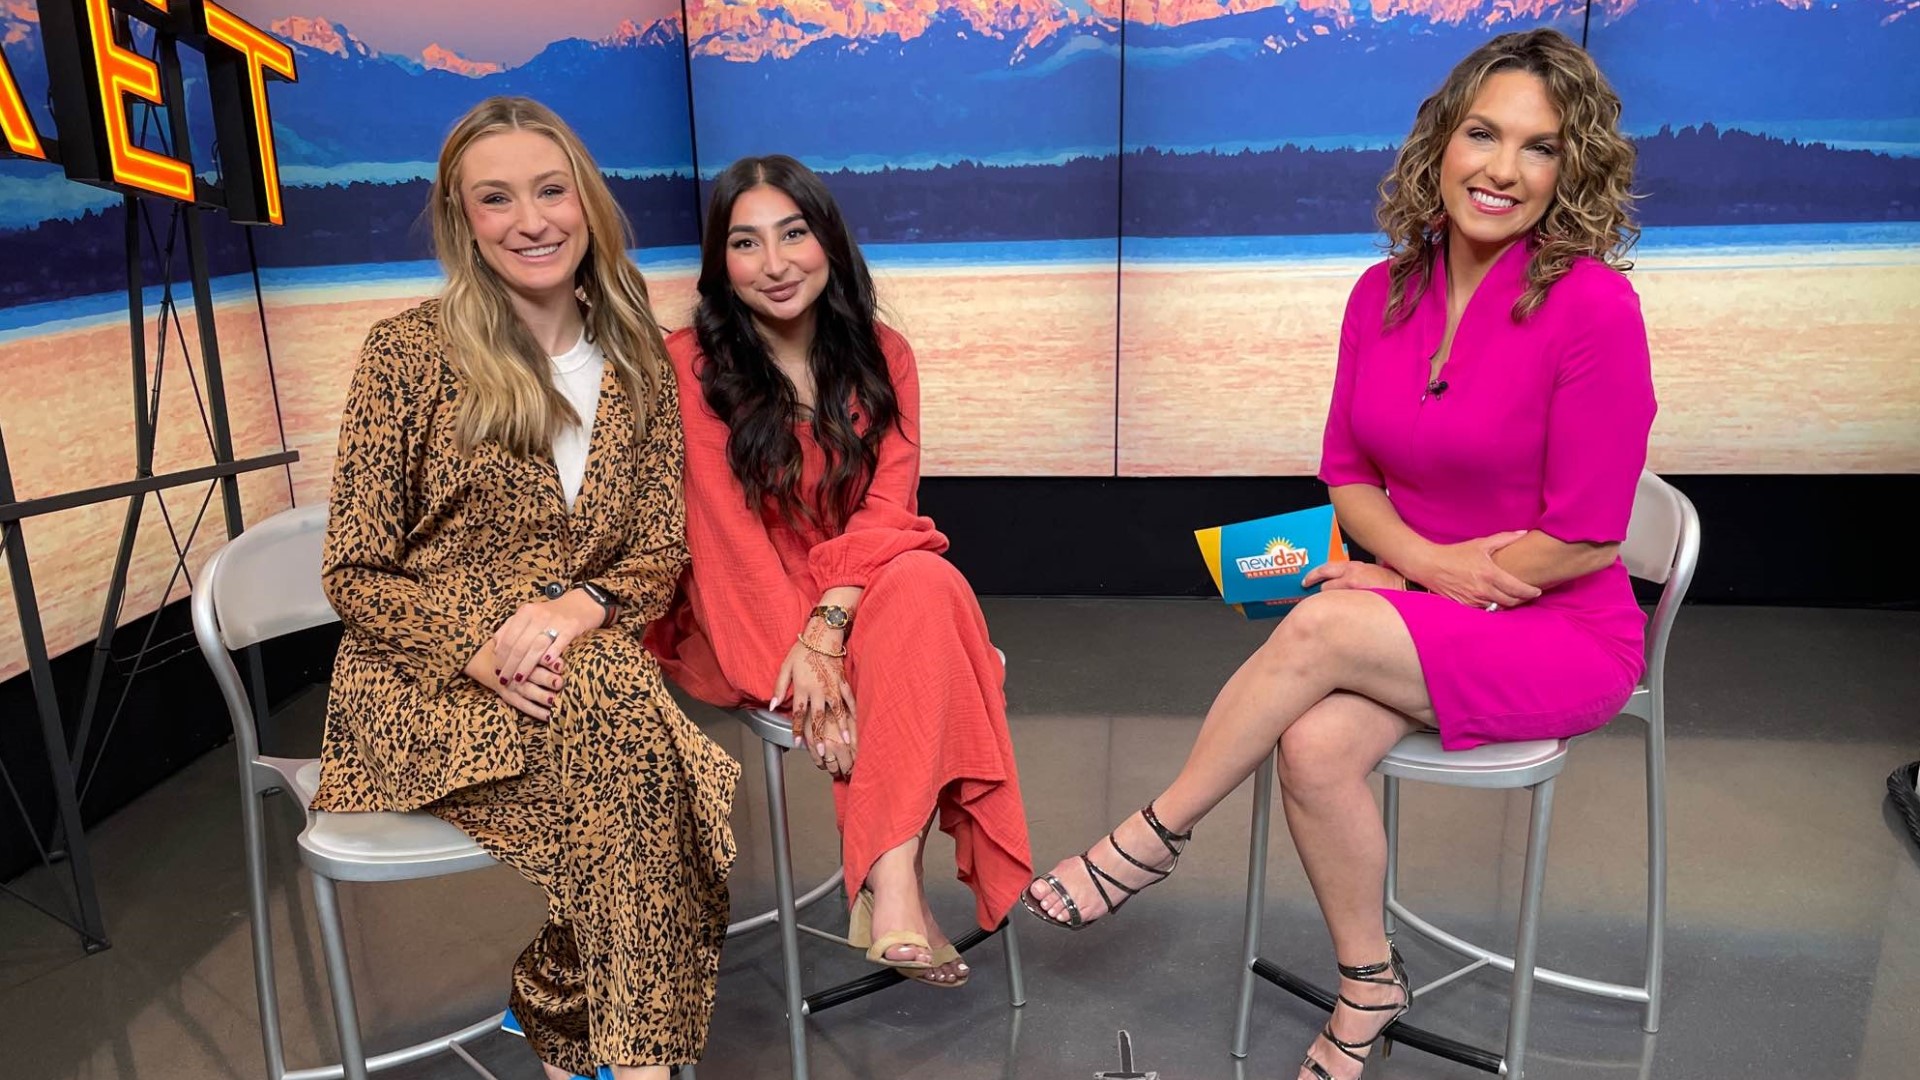 Stylist Darcy Camden and fashion blogger Aani Aslam (@lifeofaani) teamed up to share six tips on how to dress modestly without sacrificing style. #newdaynw